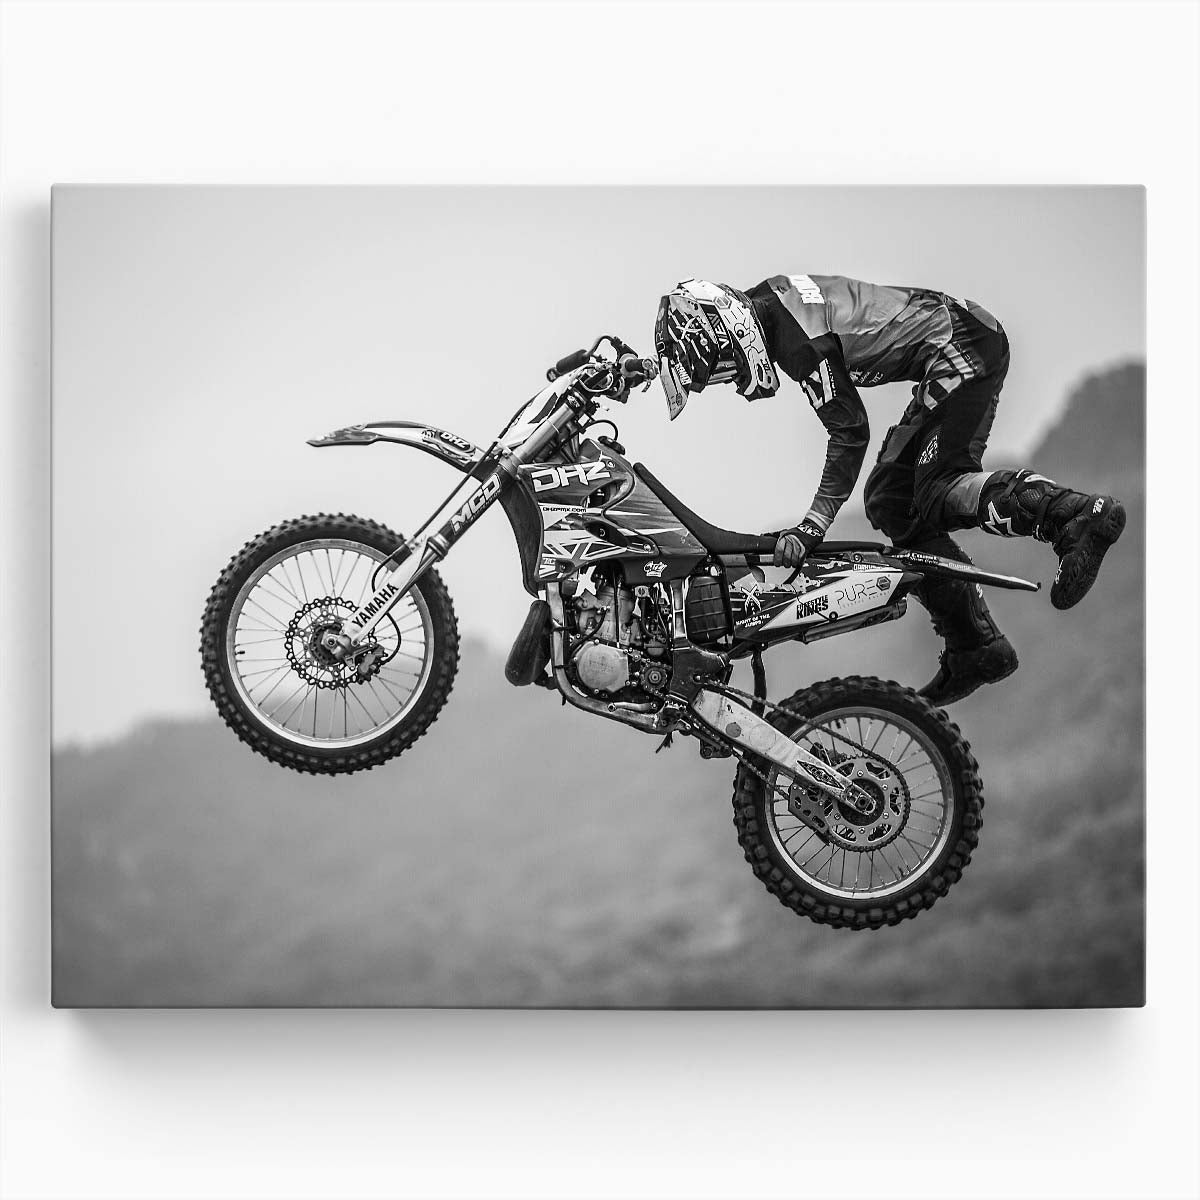 Motocross Stunt Leap Black and White Photography - Action Art Wall Art by Luxuriance Designs. Made in USA.